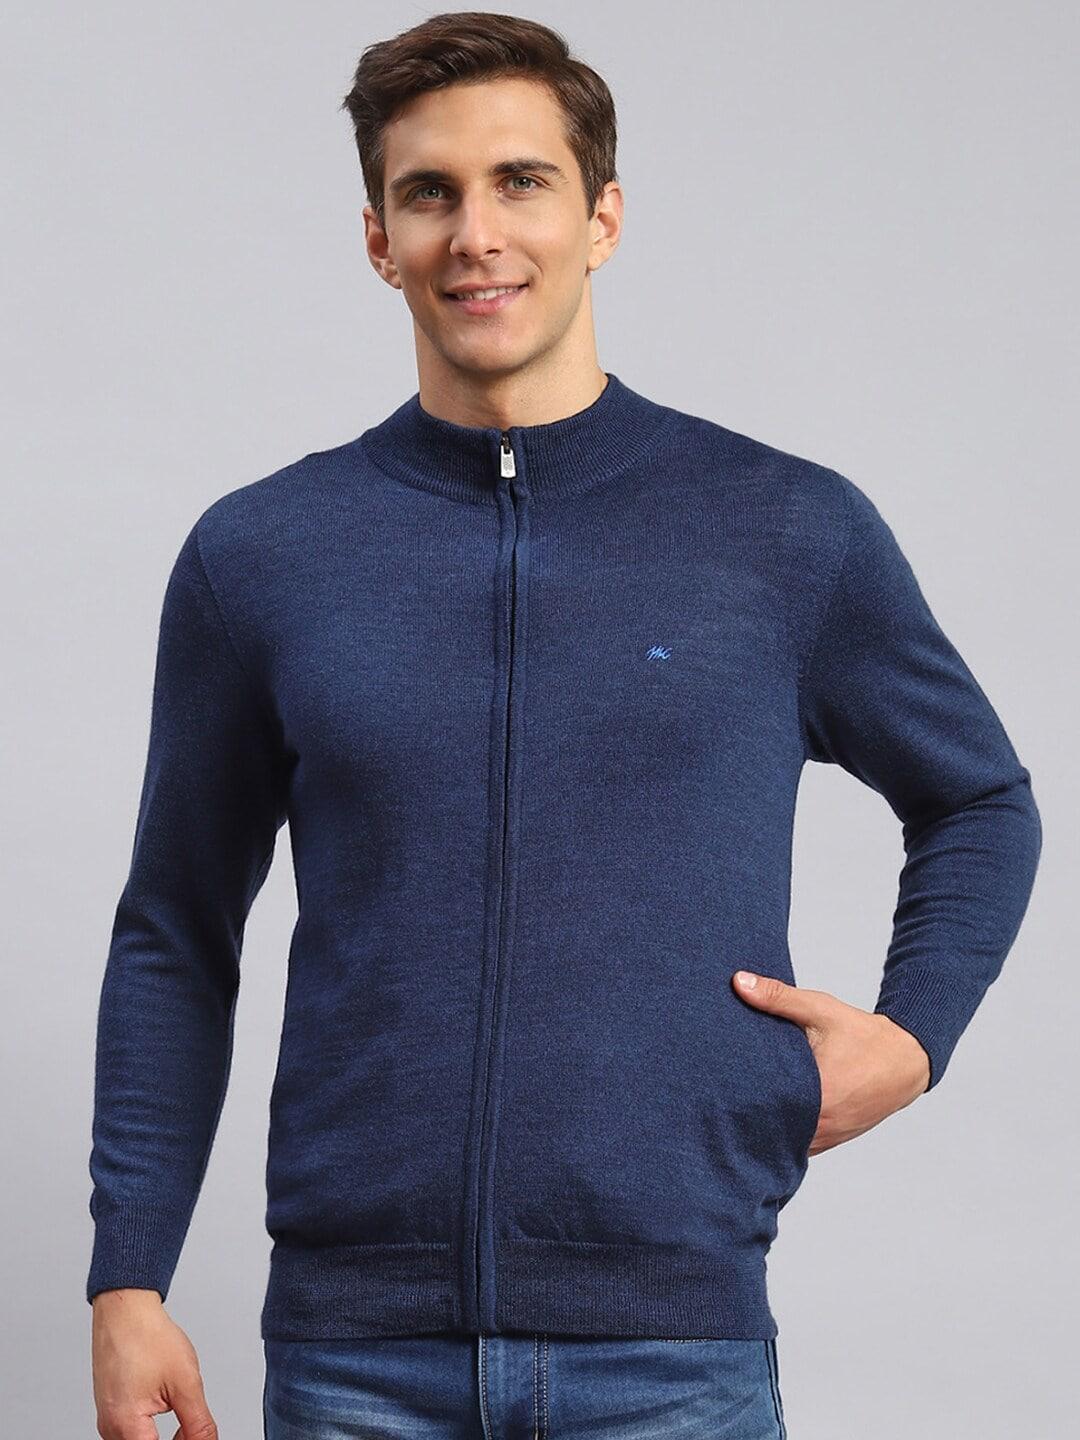 monte-carlo-mock-neck-ribbed-pure-woollen-front-open-pullover